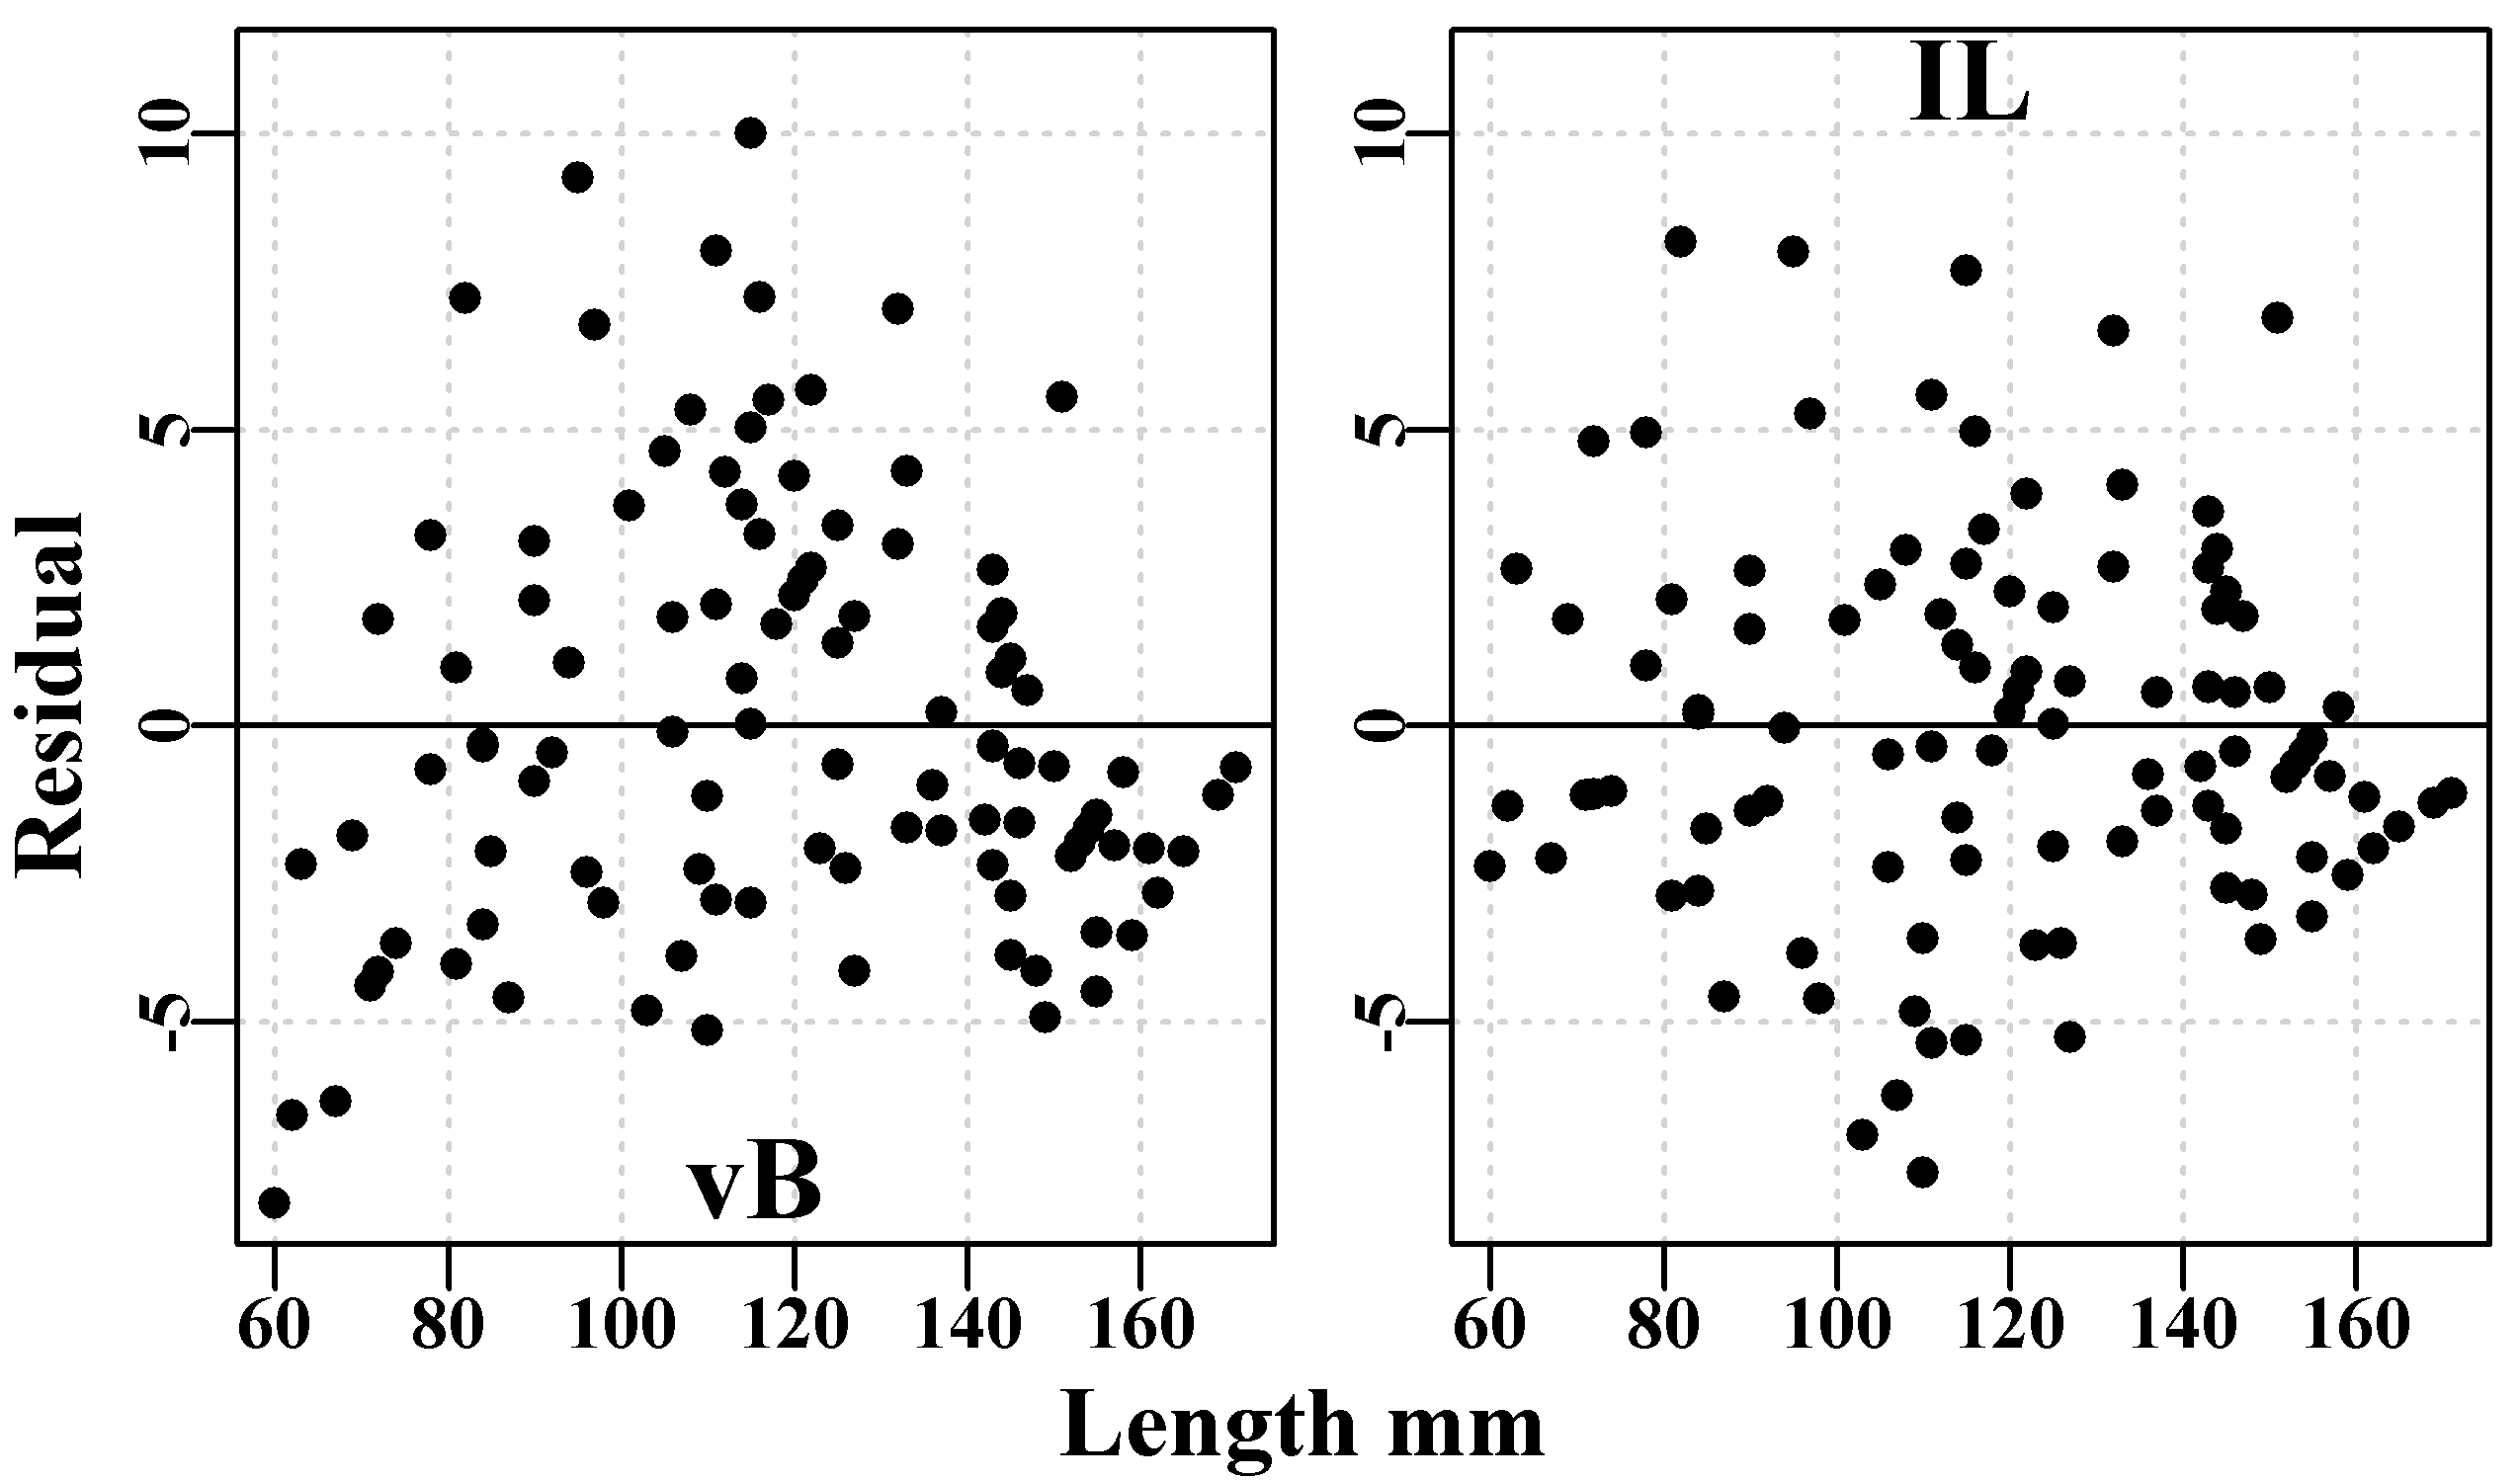 The von Bertalanffy (left hand) and inverse logistic (right hand) plots of the residuals from the curves fitted to blacklip abalone tagging data from Black Island. The time interval between tagging and recapture was 1.02 years.